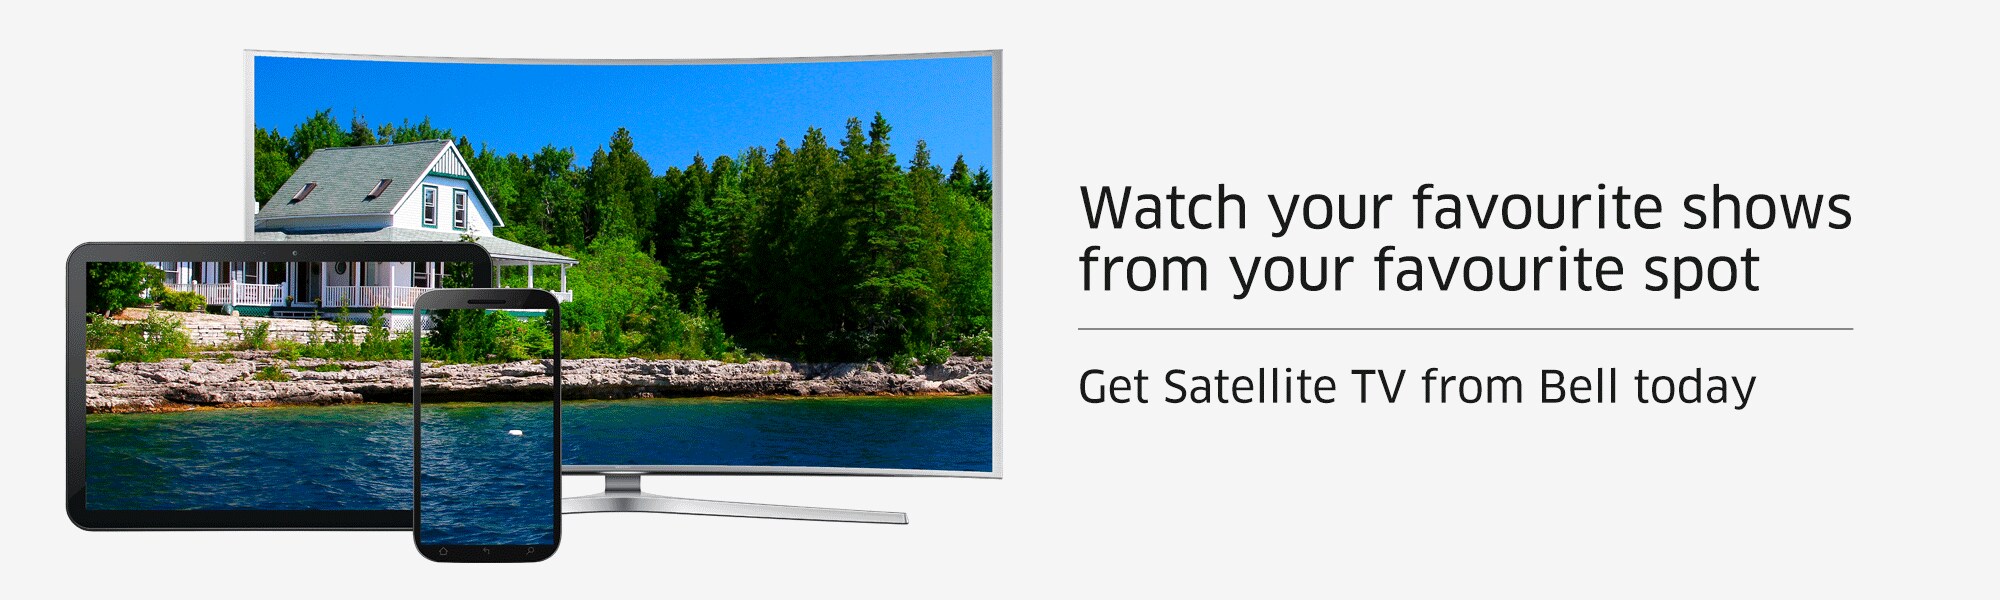 Watch your favourite shows from your favourite spot Get Satellite TV from Bell today